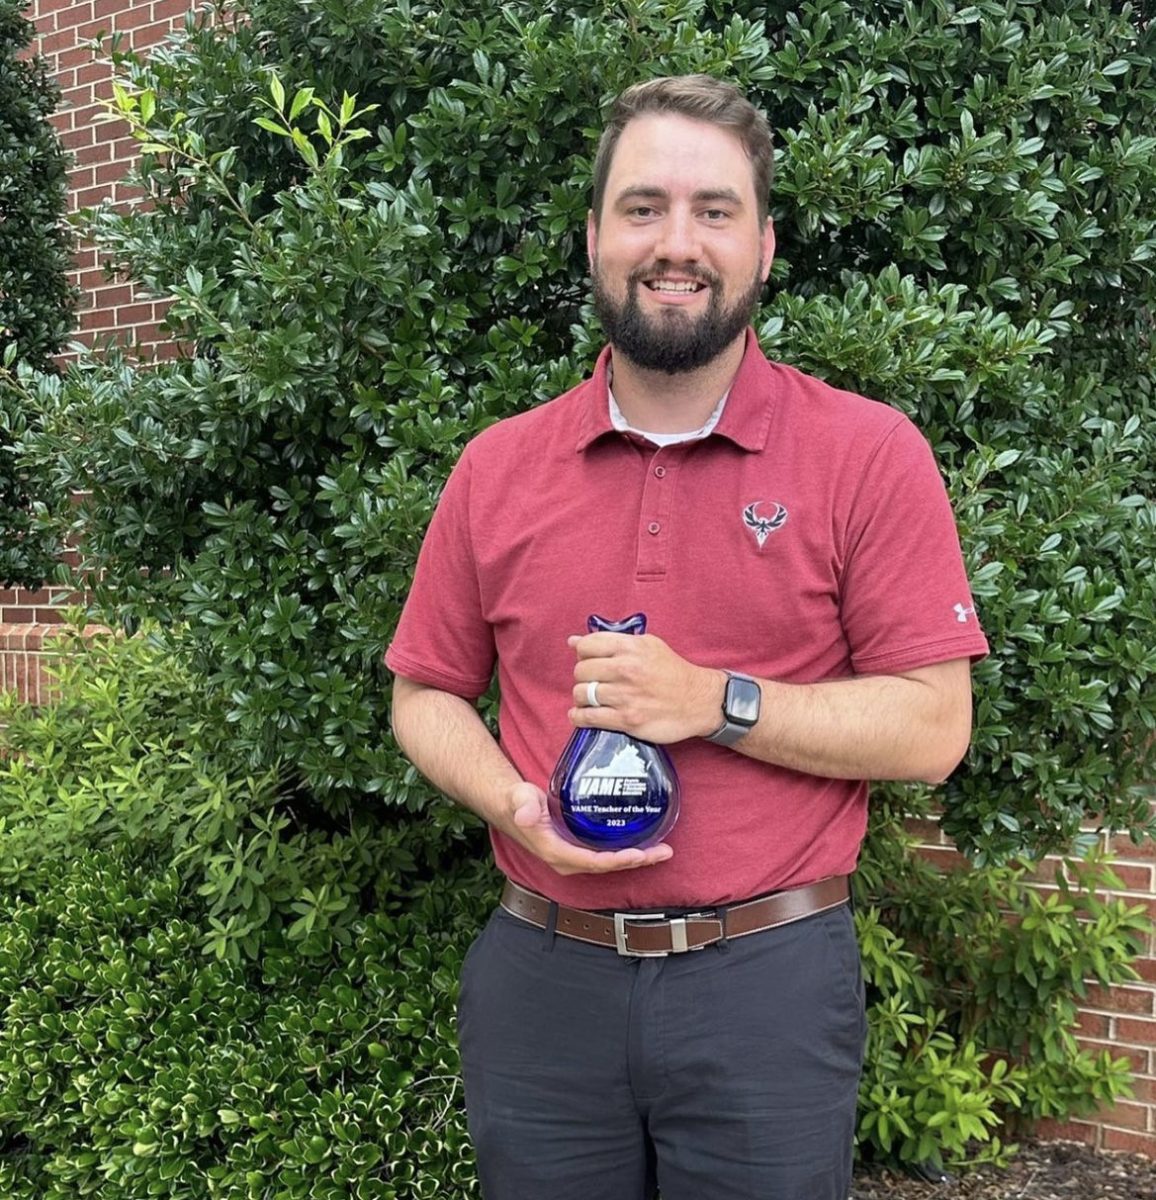 Marketing teacher Ben Stodola holds his VAME Teacher of the Year Award with pride. “I enjoyed reflecting on things that I have done over the past couple of years,” Stodola said. Photo courtesy of Ben Stodola.